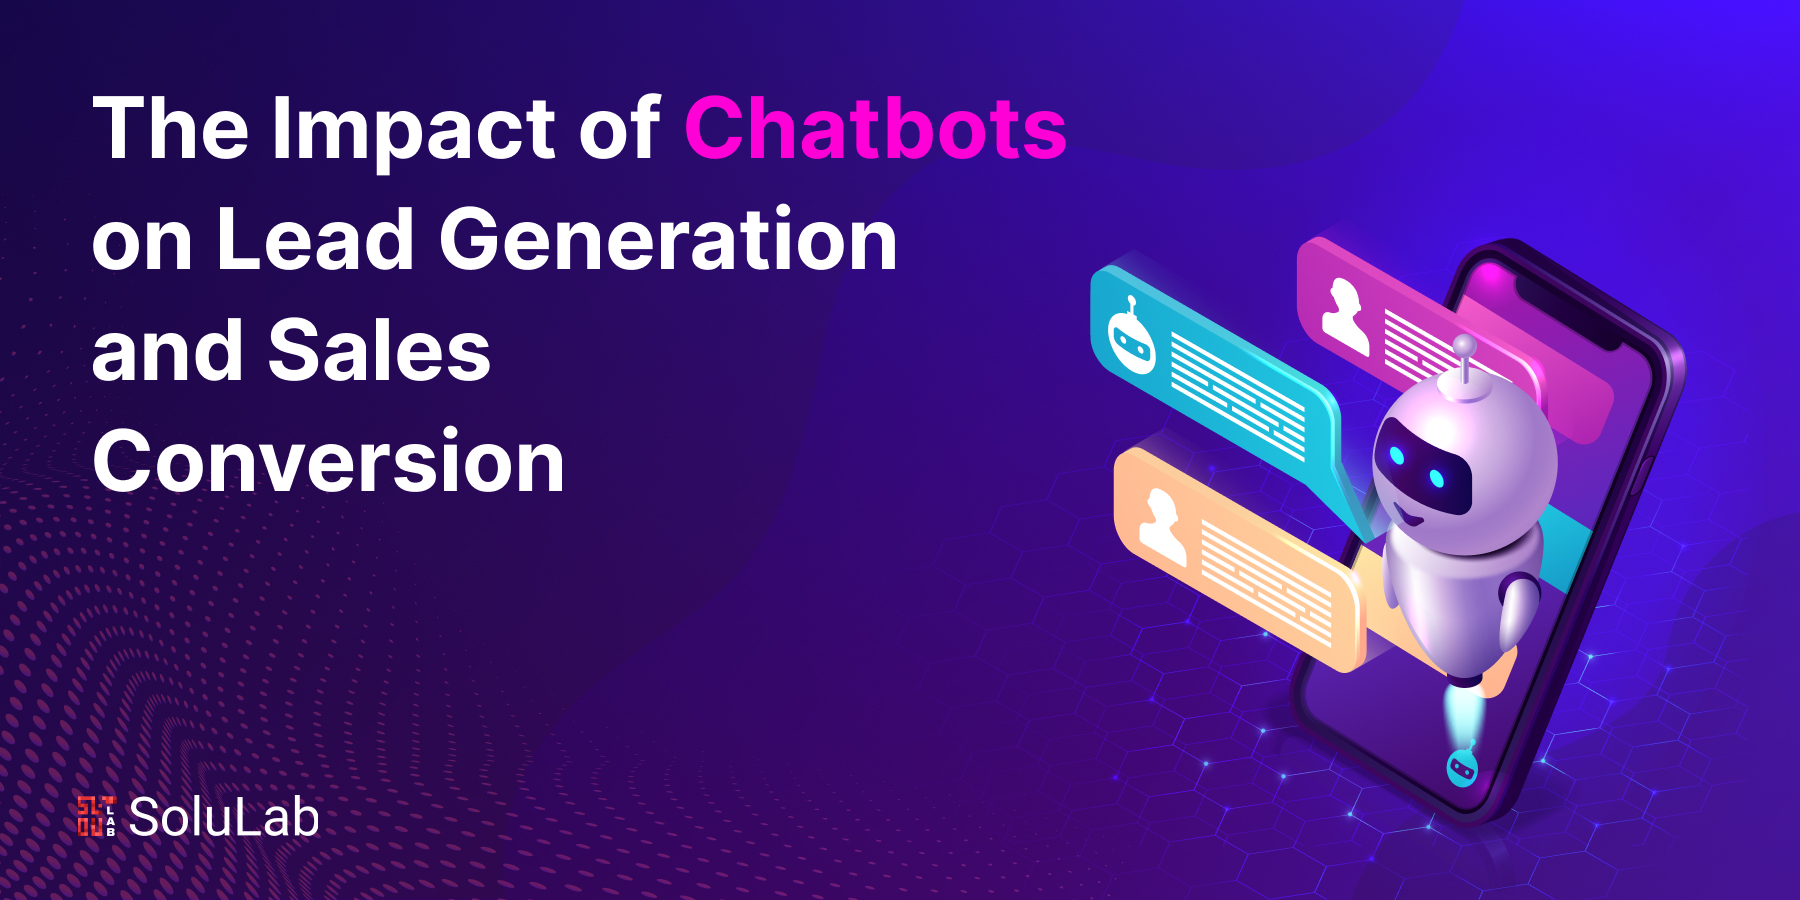 The Impact of Chatbots on Lead Generation and Sales Conversion